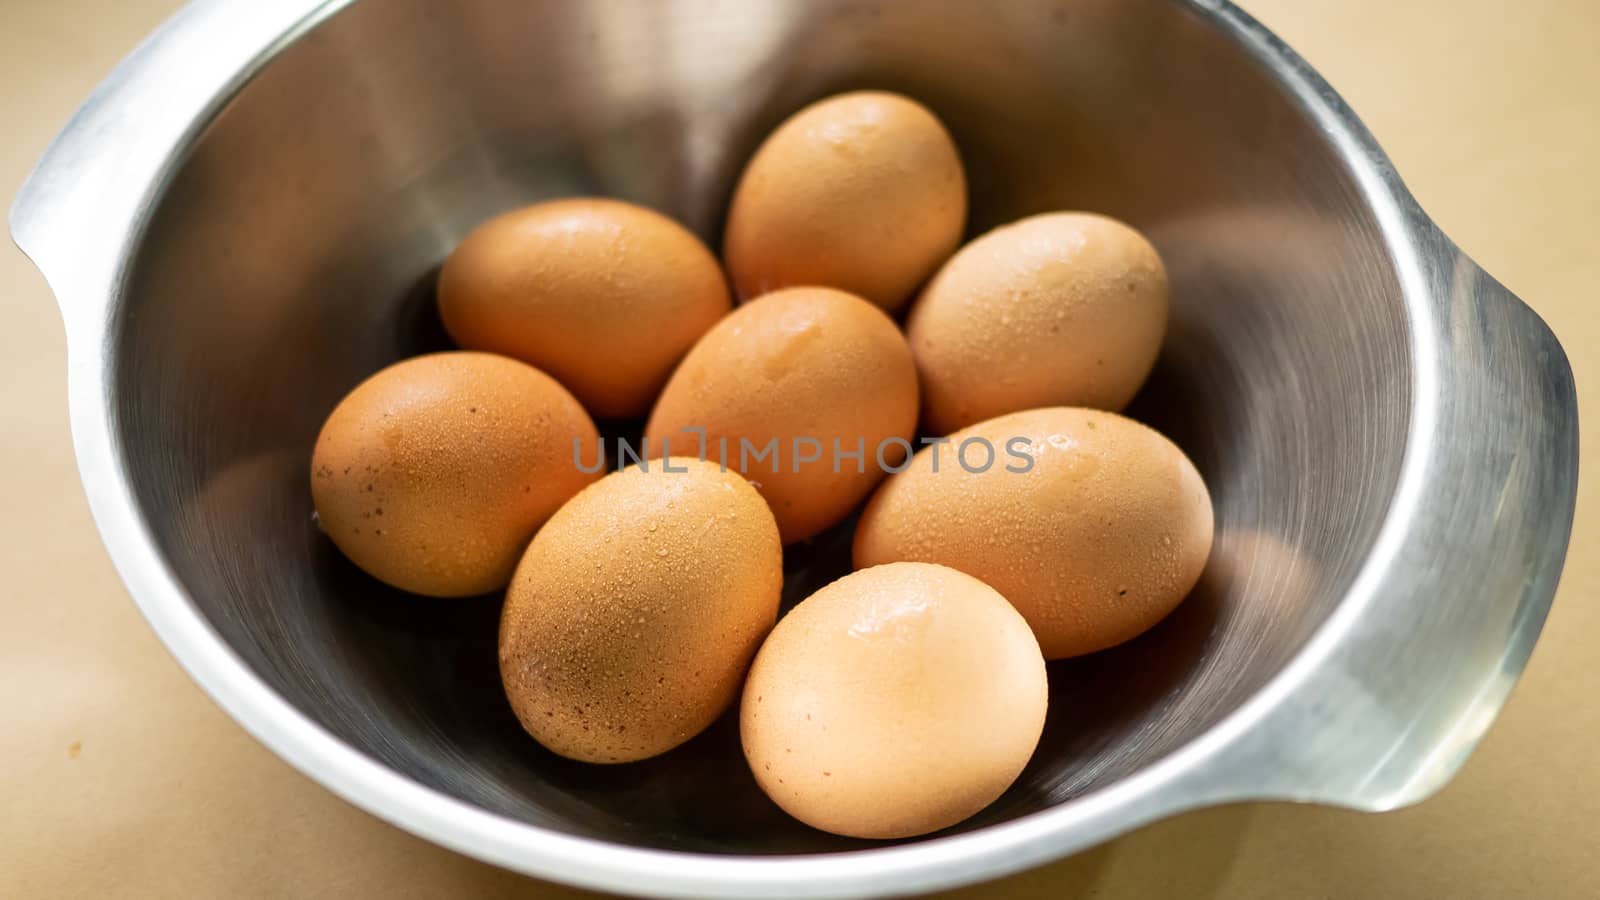 The close up of Fresh eggs in the stainless bowl.